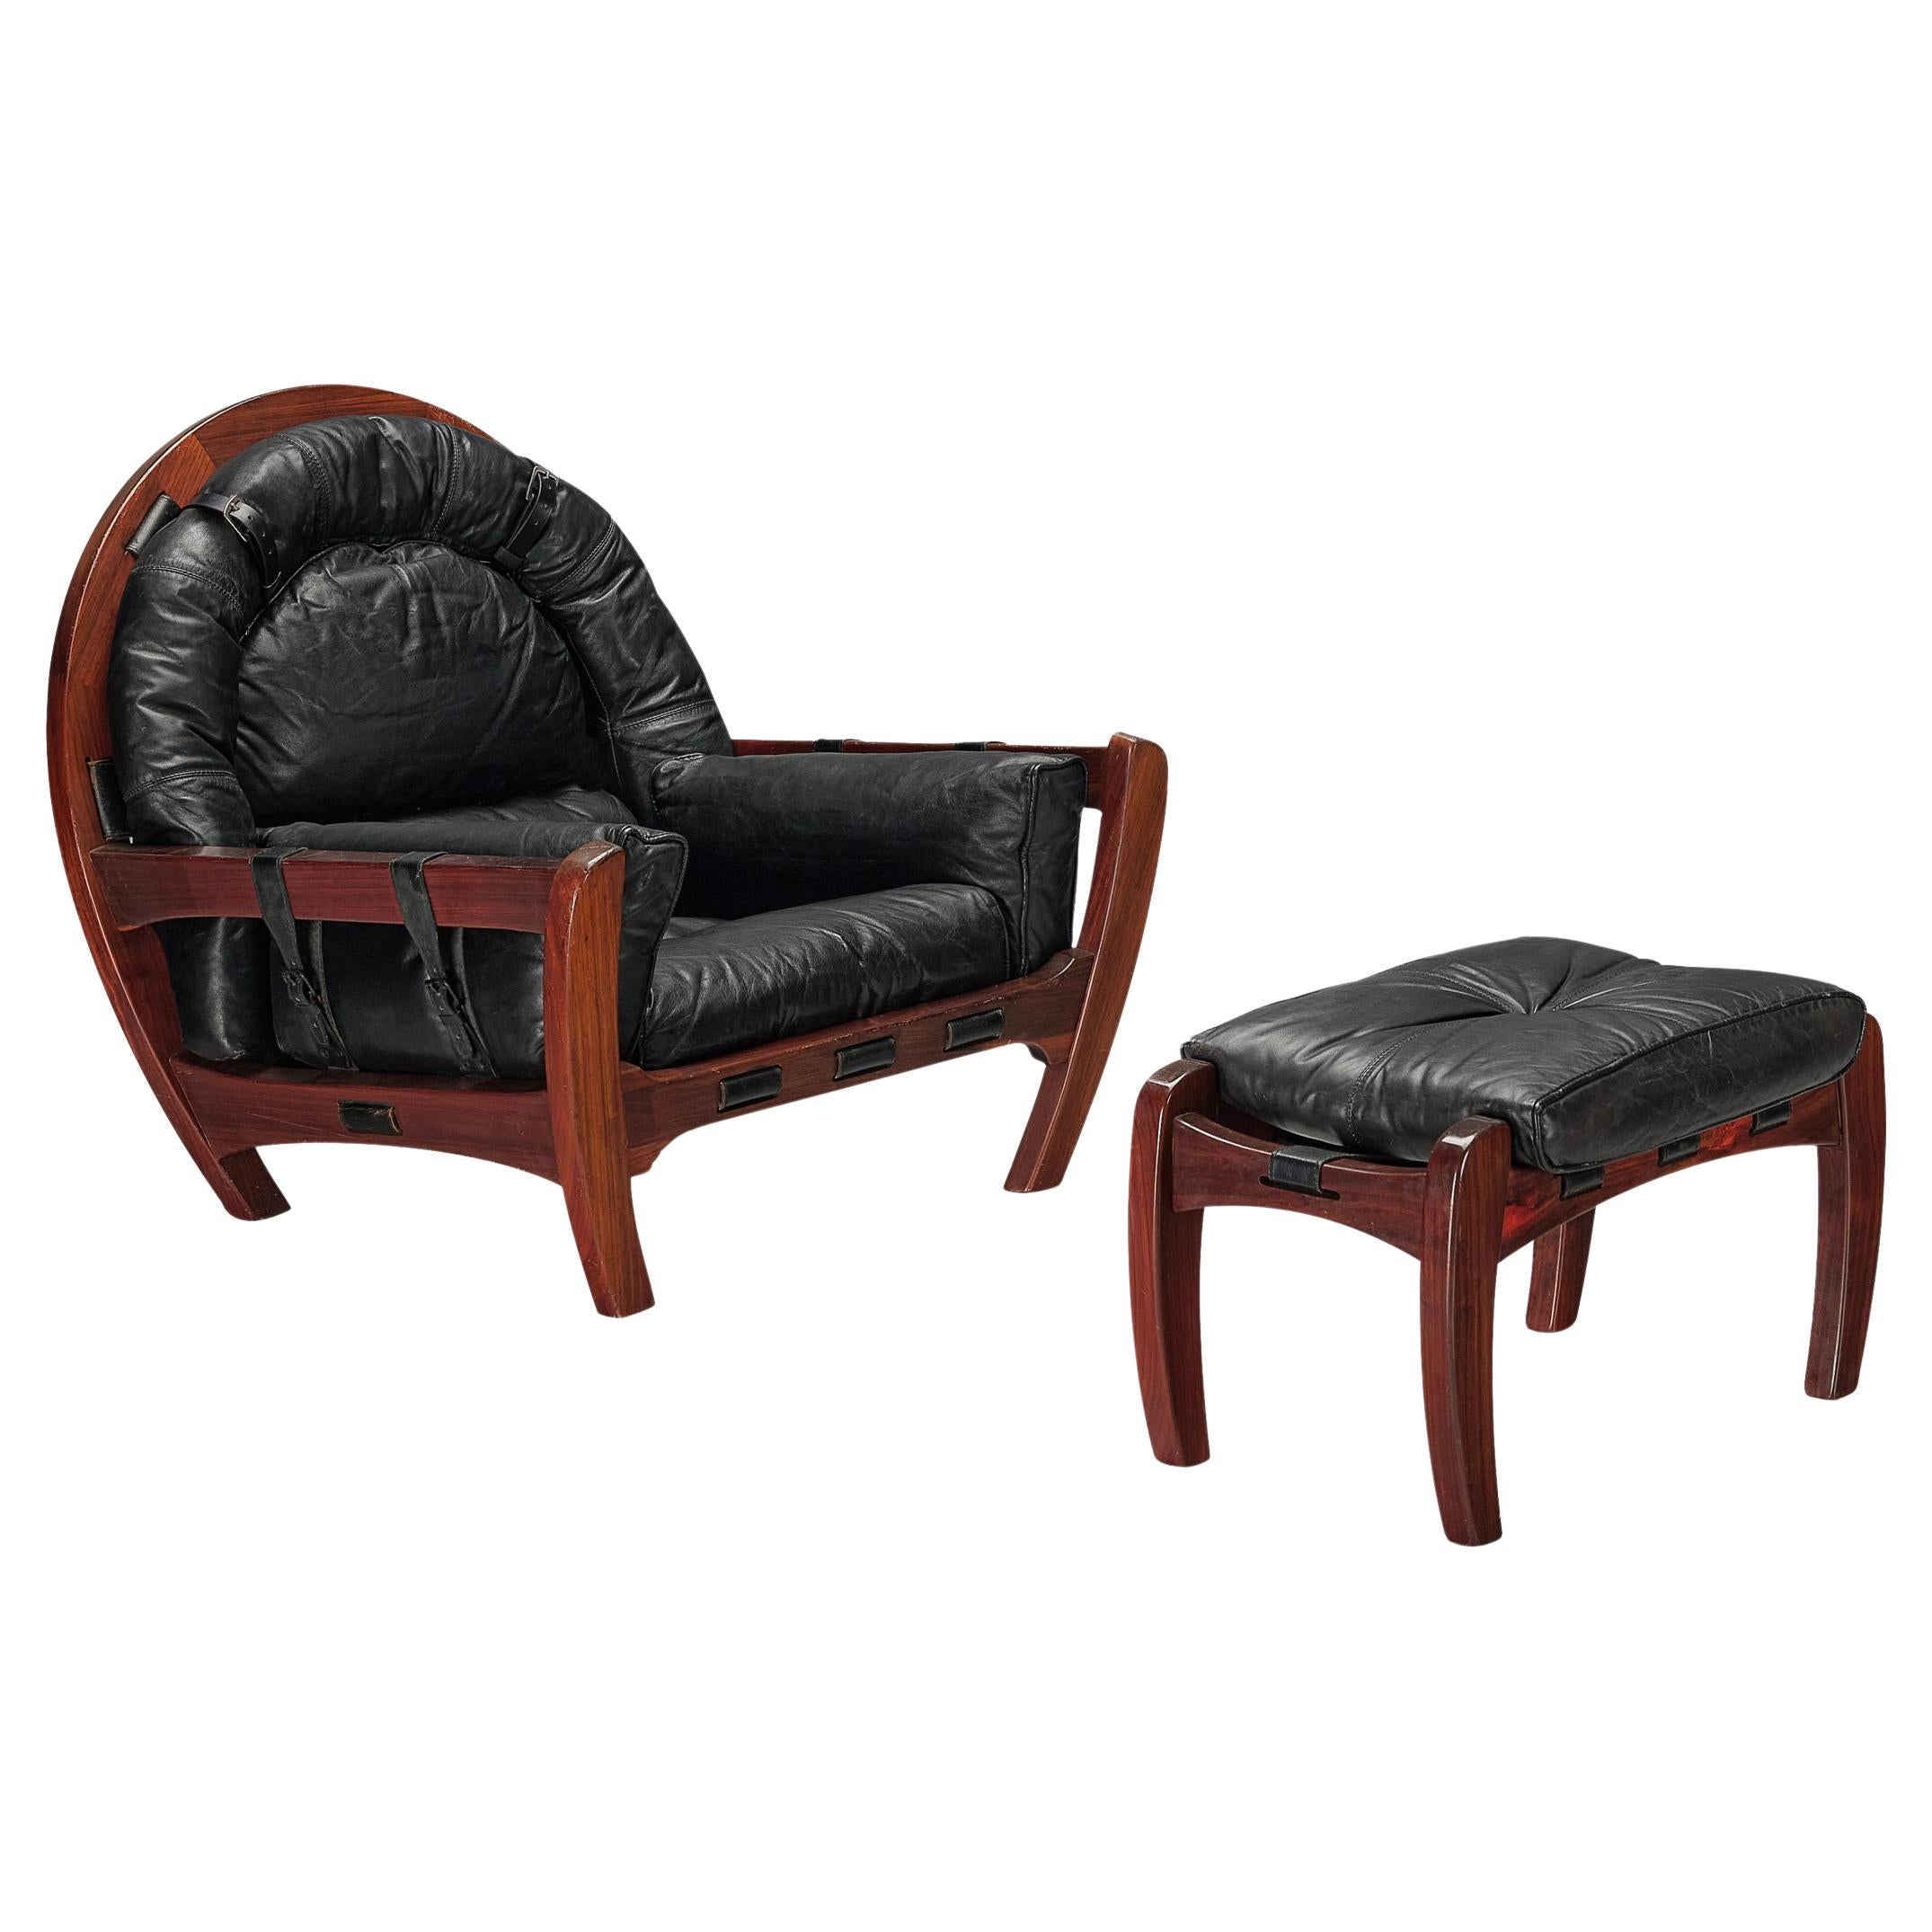 Luciano Frigerio 'Rancero' Lounge Chair with Ottoman in Black Leather 